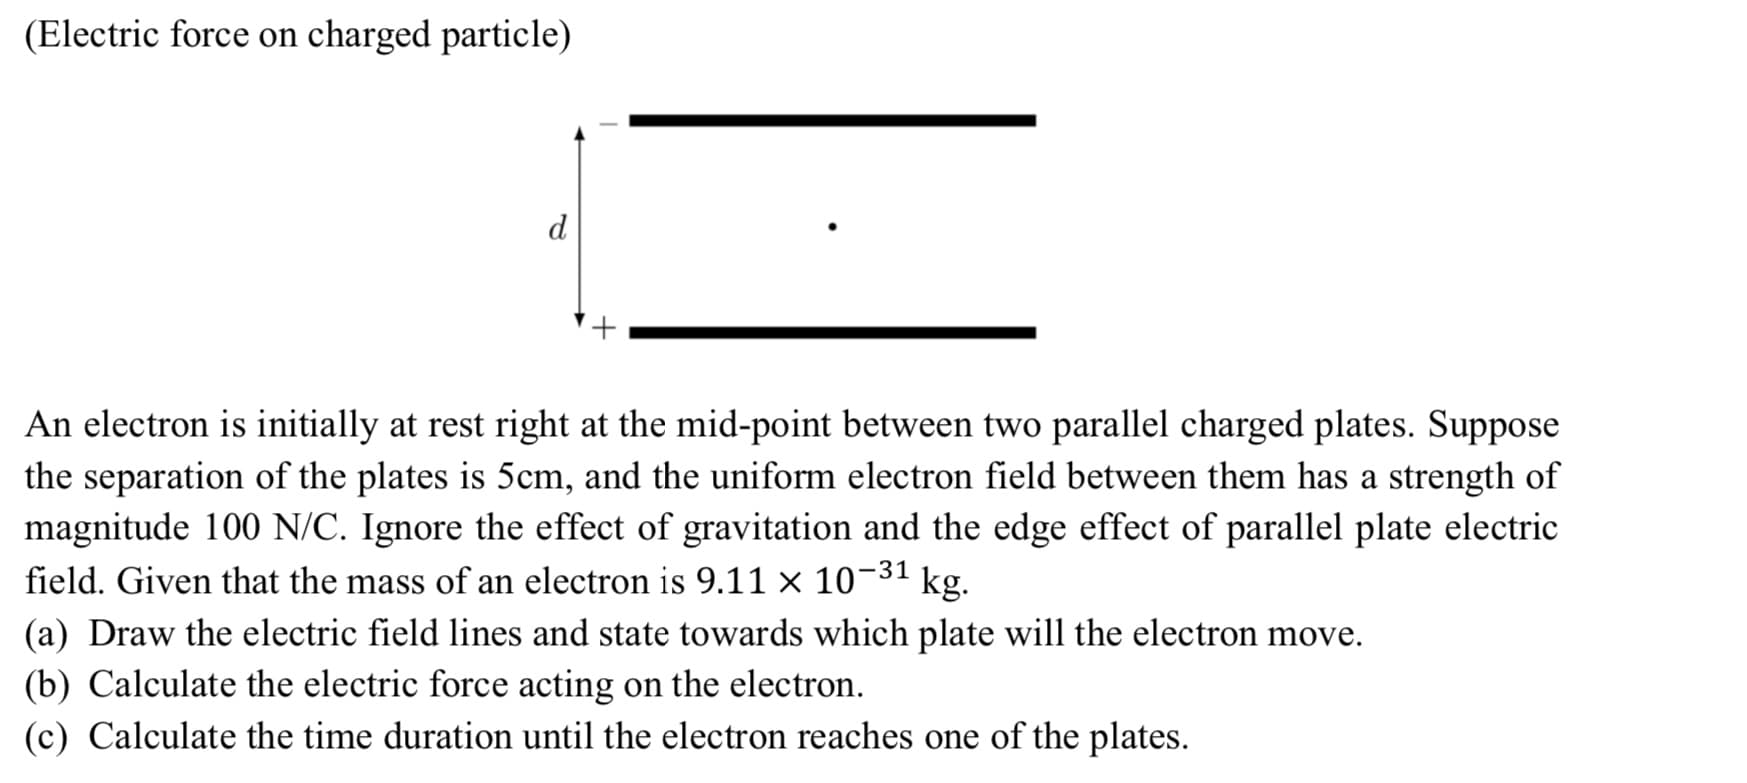 (Electric force on charged particle)
An electron is initially at rest right at the mid-point between two parallel charged plates. Suppose
the separation of the plates is 5cm, and the uniform electron field between them has a strength of
magnitude 100 N/C. Ignore the effect of gravitation and the edge effect of parallel plate electric
field. Given that the mass of an electron is 9.11 × 10-31 kg.
(a) Draw the electric field lines and state towards which plate will the electron move.
(b) Calculate the electric force acting on the electron.
(c) Calculate the time duration until the electron reaches one of the plates.
